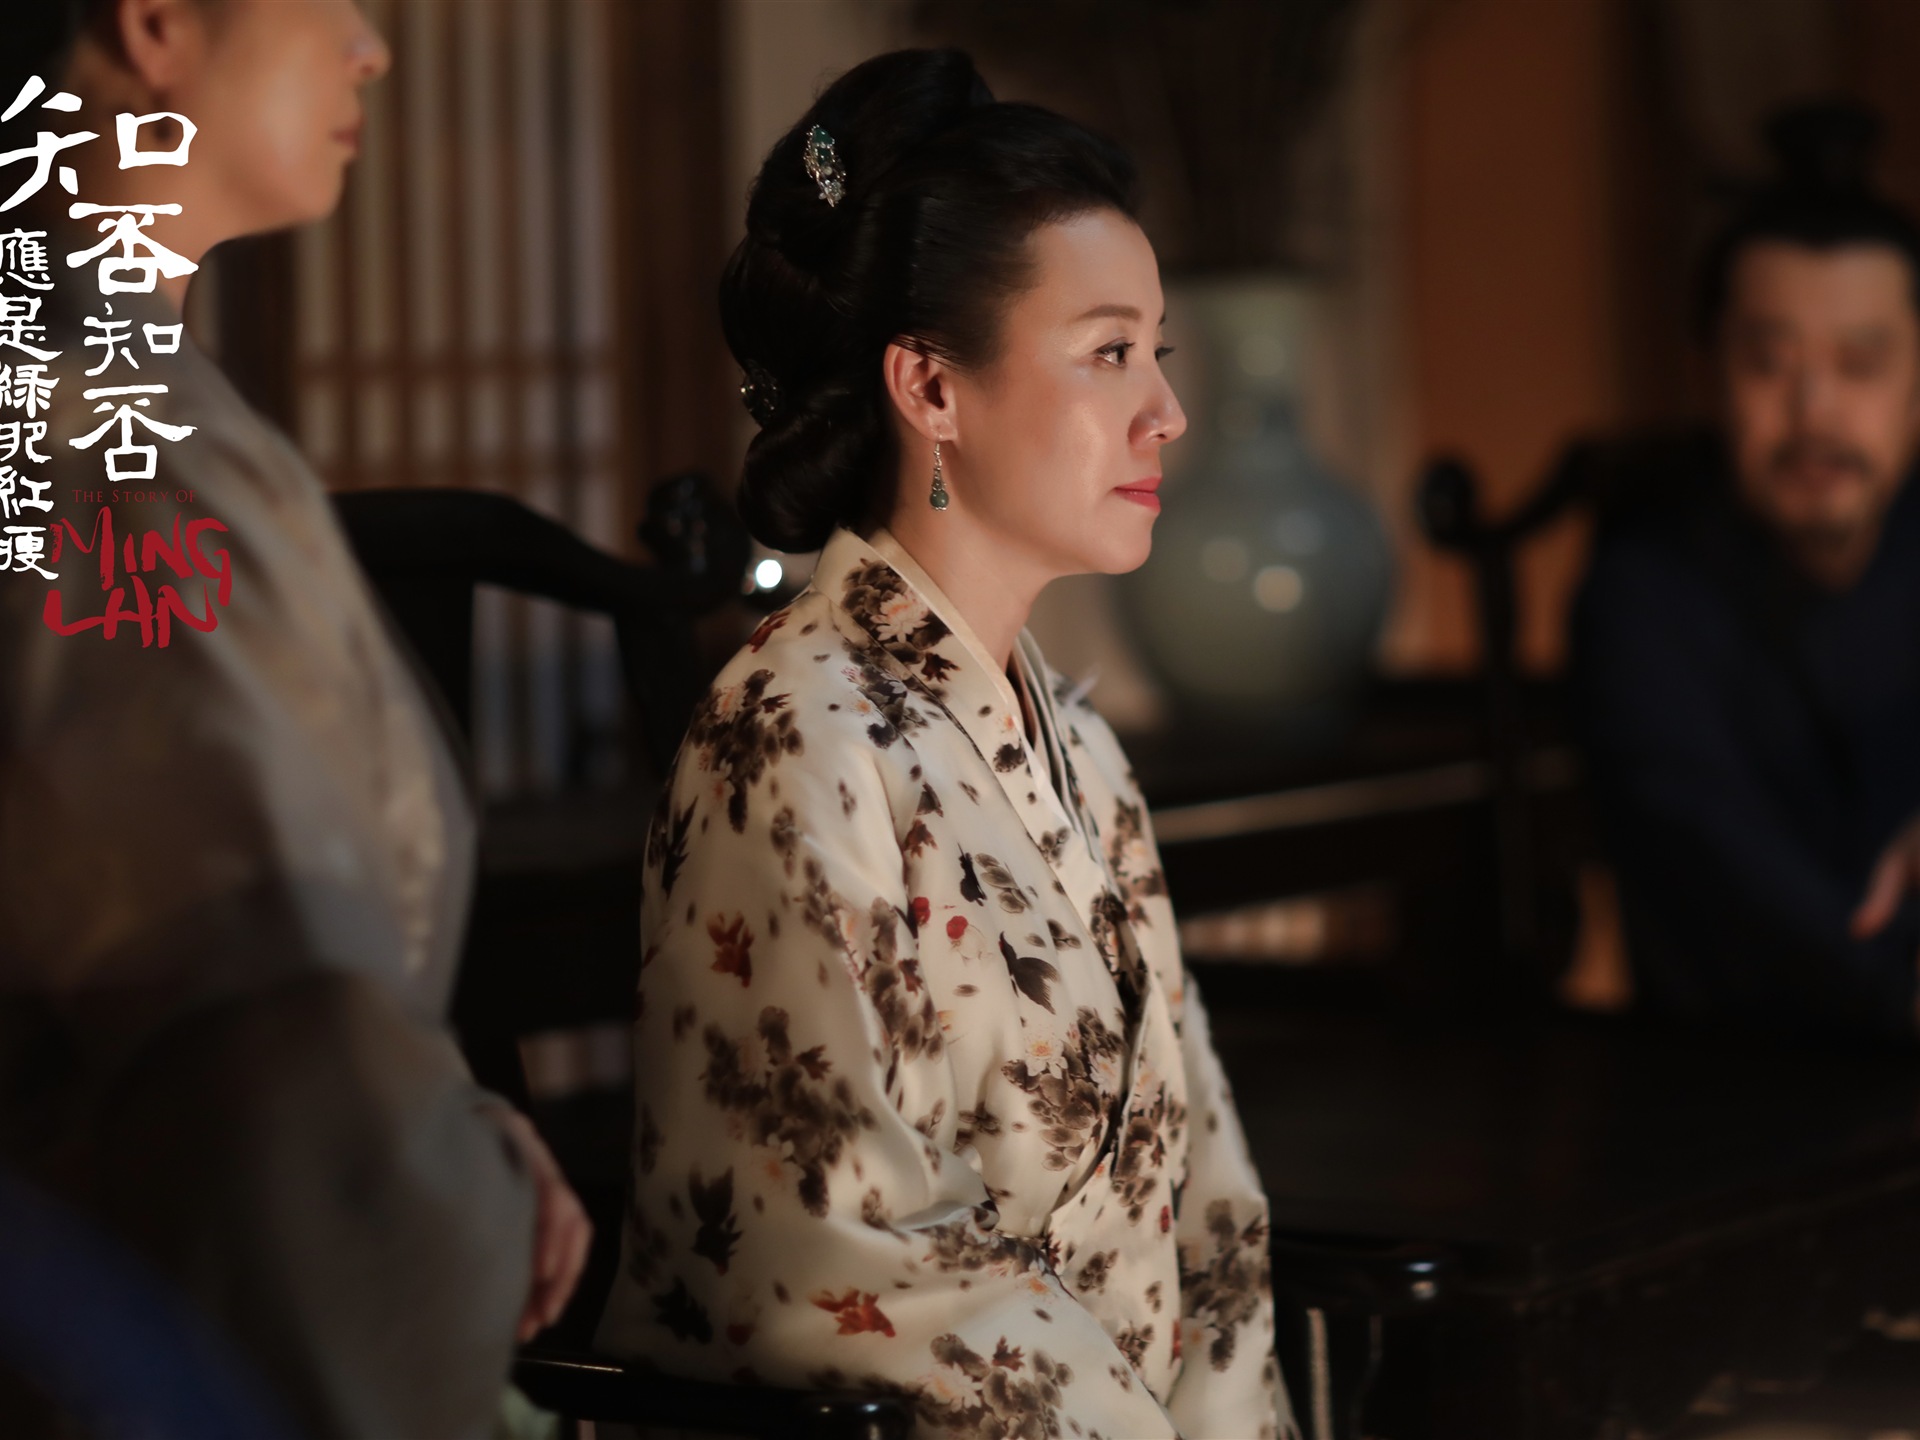 The Story Of MingLan, TV series HD wallpapers #2 - 1920x1440